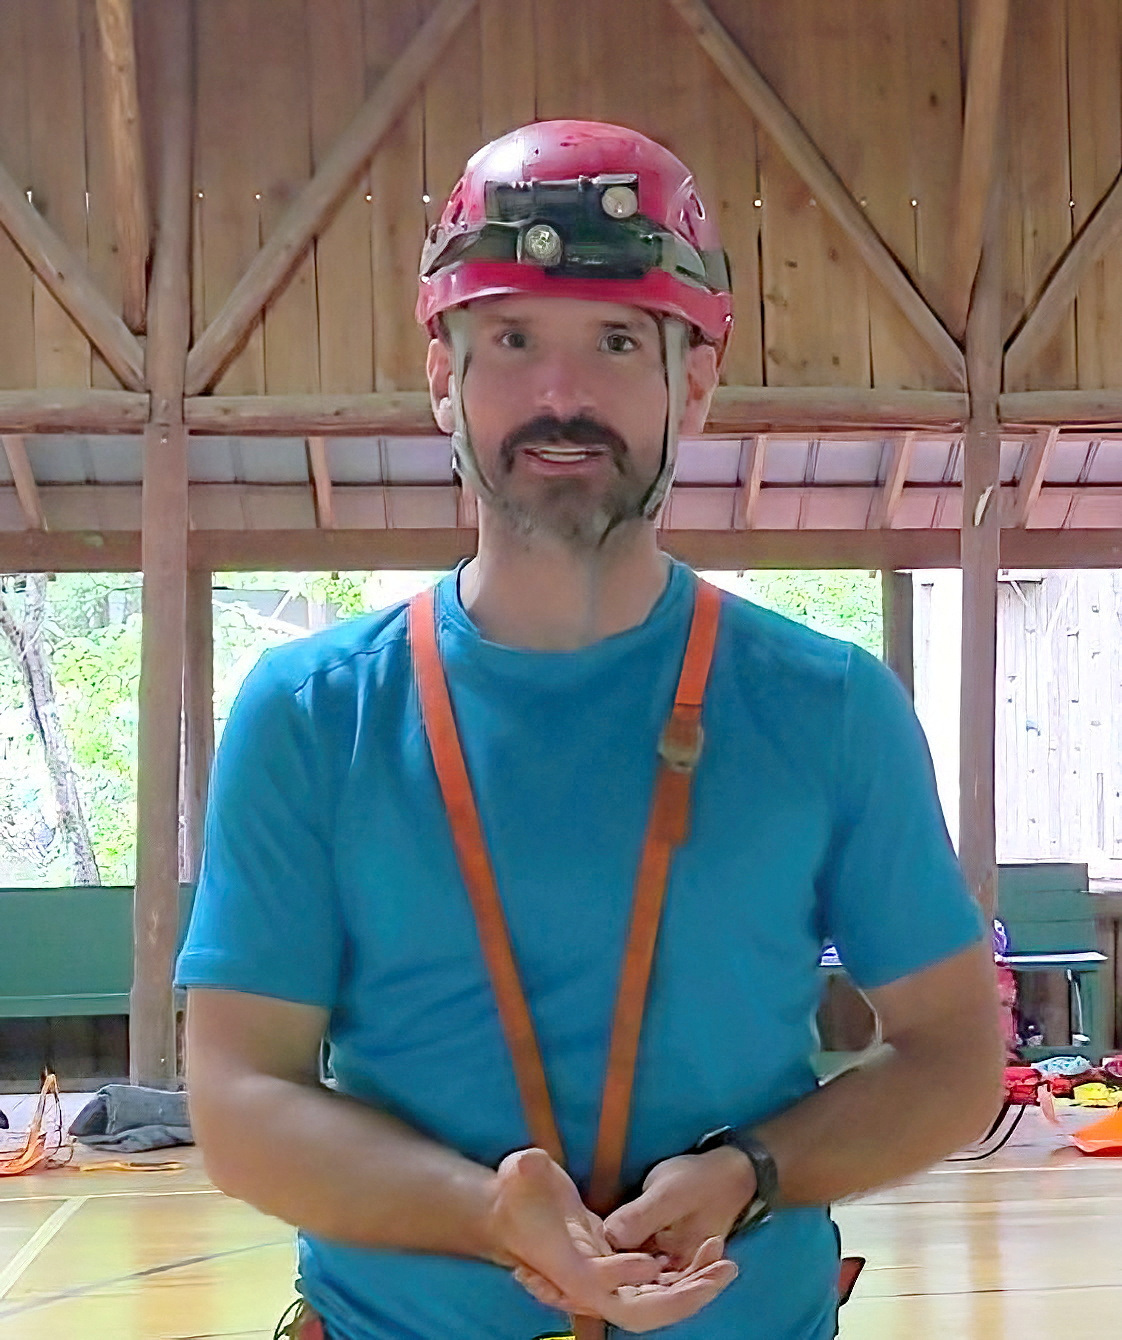 Mark Dickey, the U.S. caver who is currently trapped near Morca, poses in Mentone